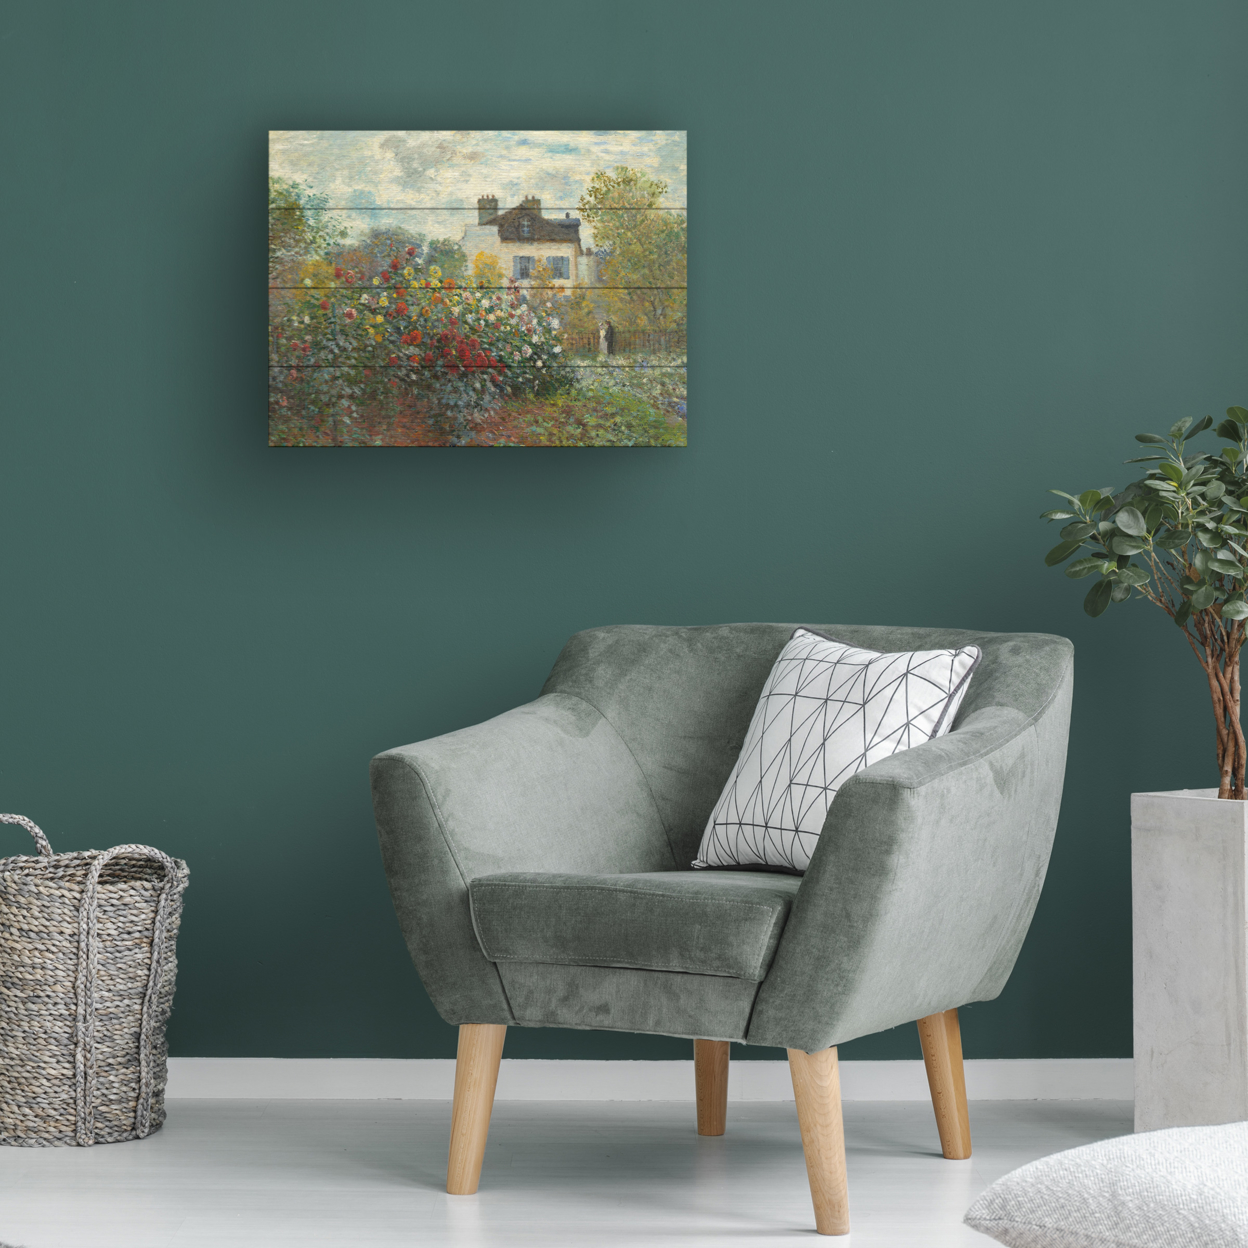 Wall Art 12 X 16 Inches Titled The Artists Garden In Argenteuil Ready To Hang Printed On Wooden Planks